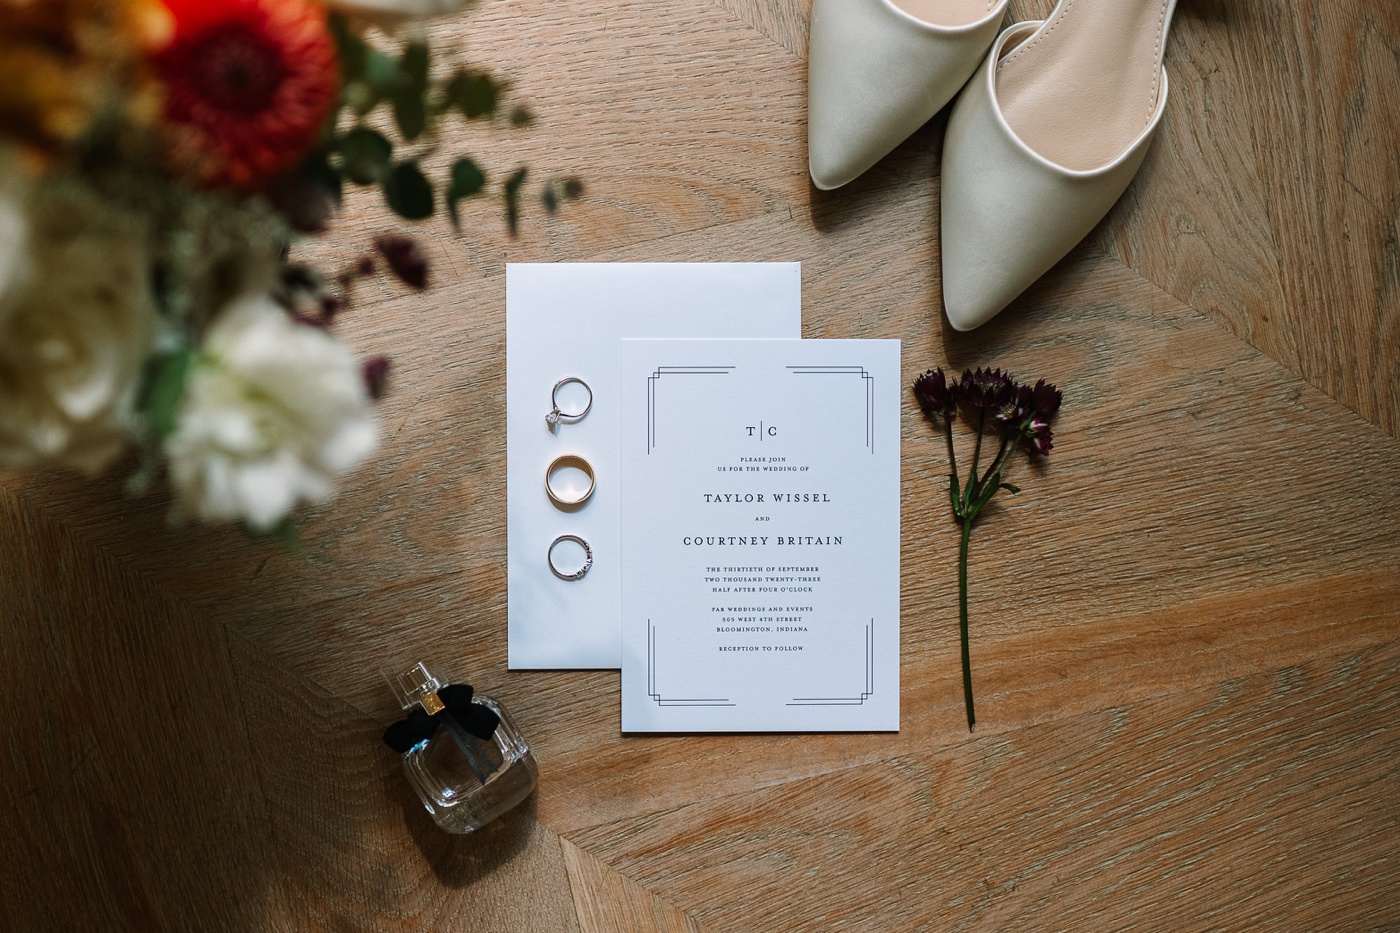 Flatlay of a modern black and white wedding invitation with flowers, perfume, and white pointed-toe bridal shoes